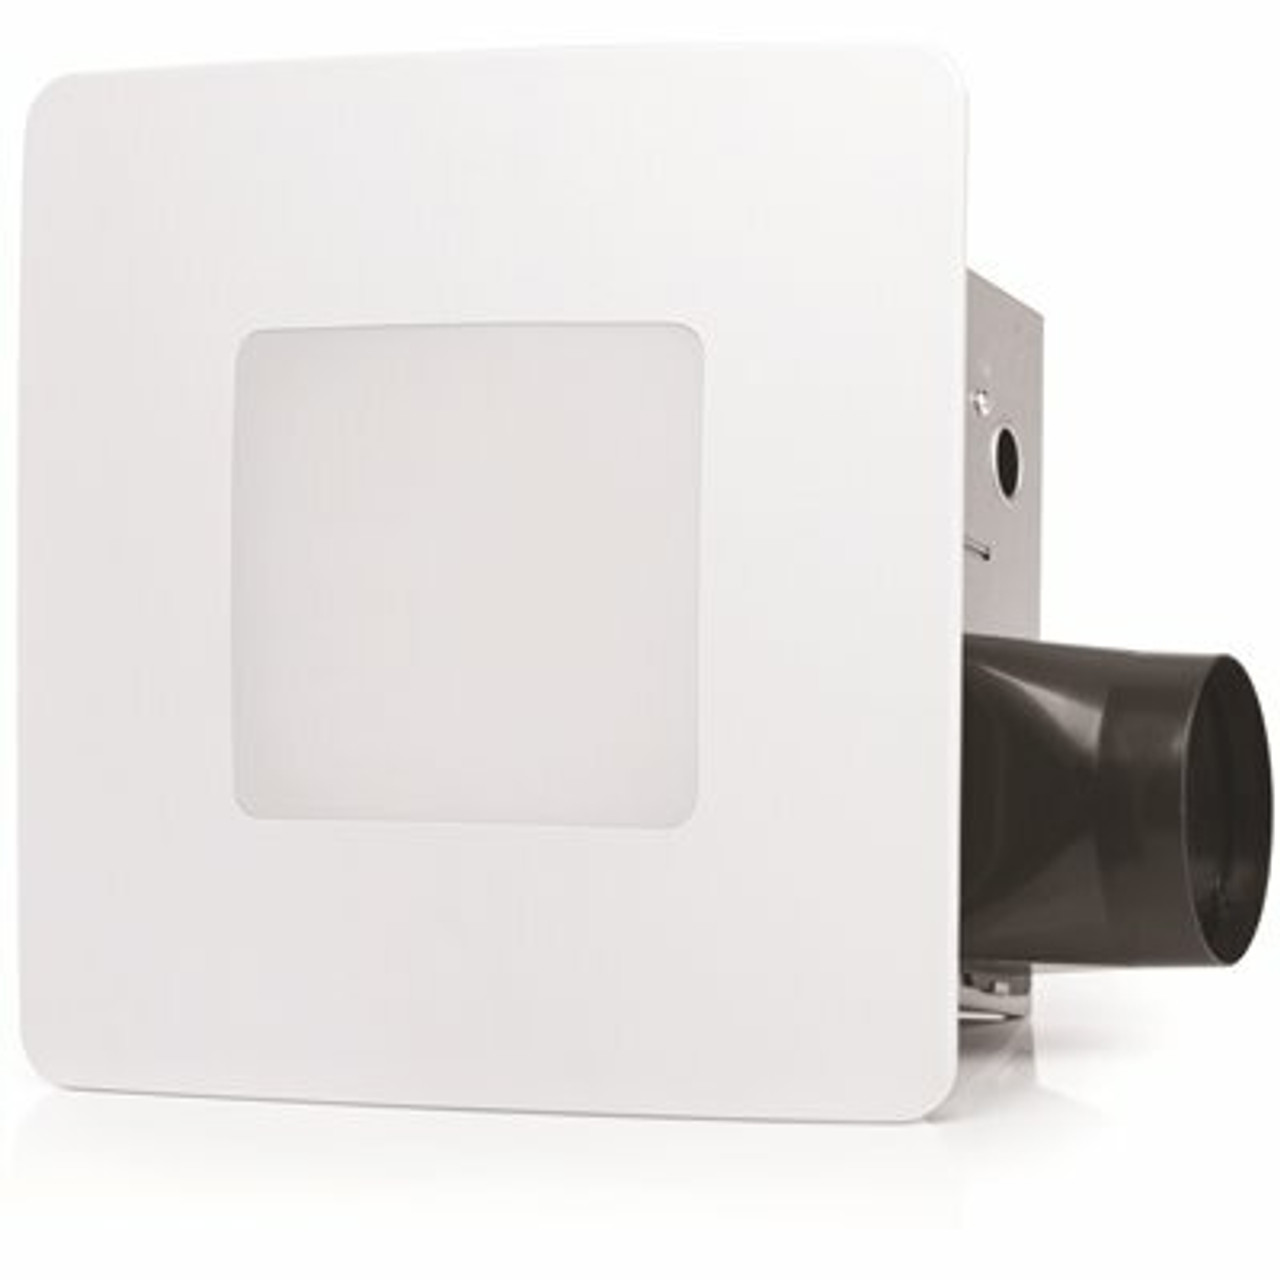 Revent 110 Cfm Easy Installation Bathroom Exhaust Fan With Led Lighting And Humidity Sensing